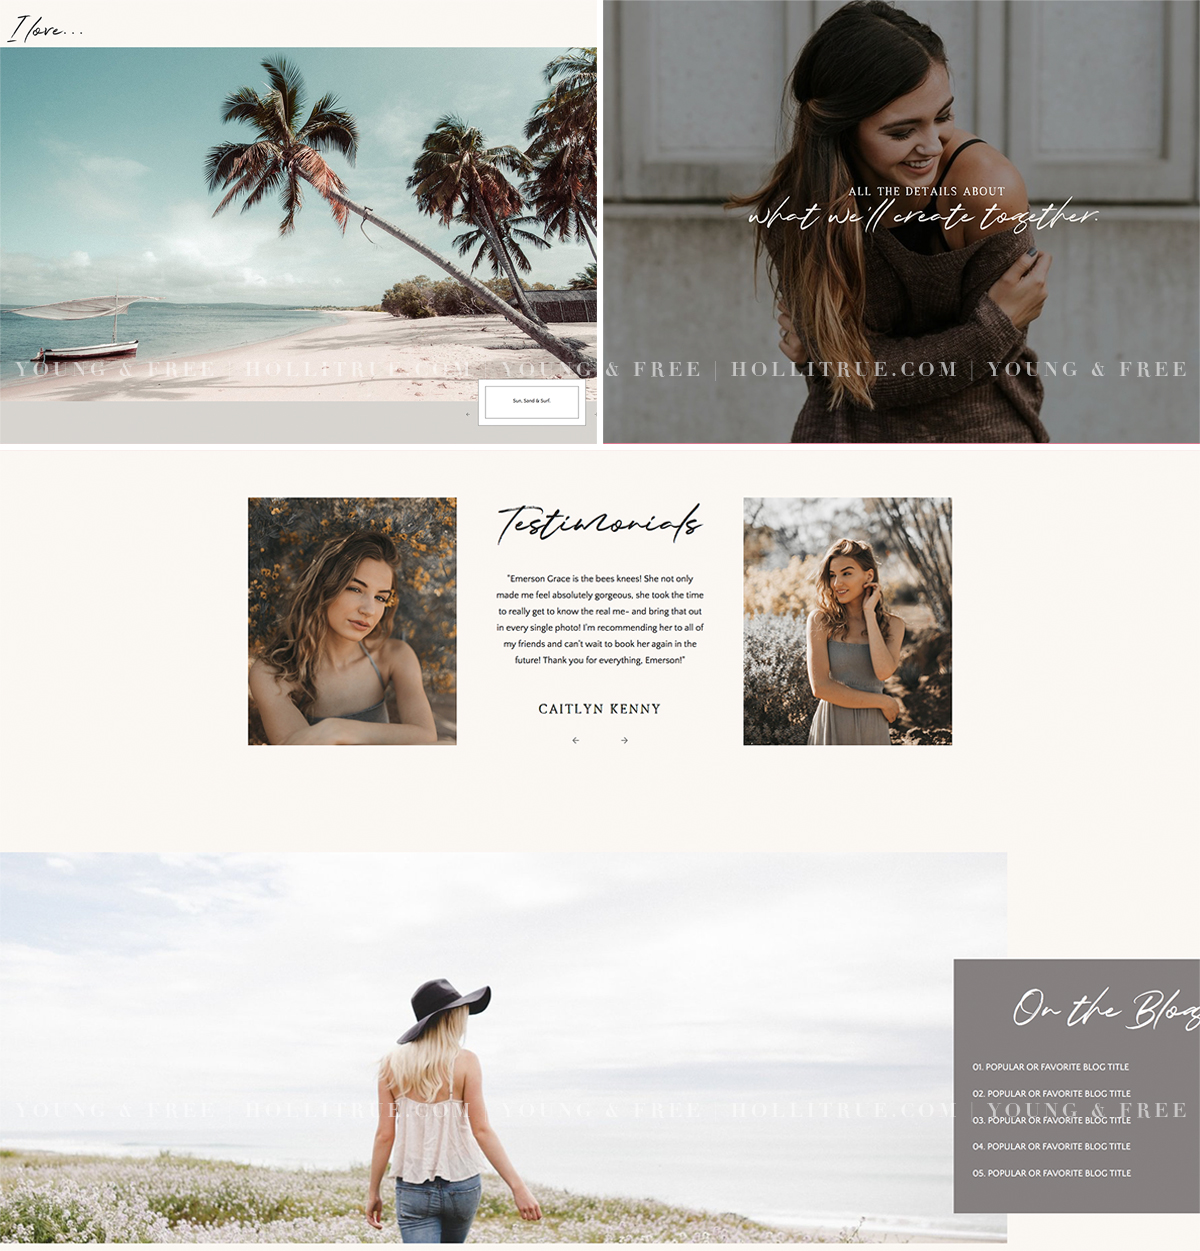 Stylish Showit Template for Photographers by Holli True Designs. Indie-inspired with a hipster vibe that refuses to be ignored.